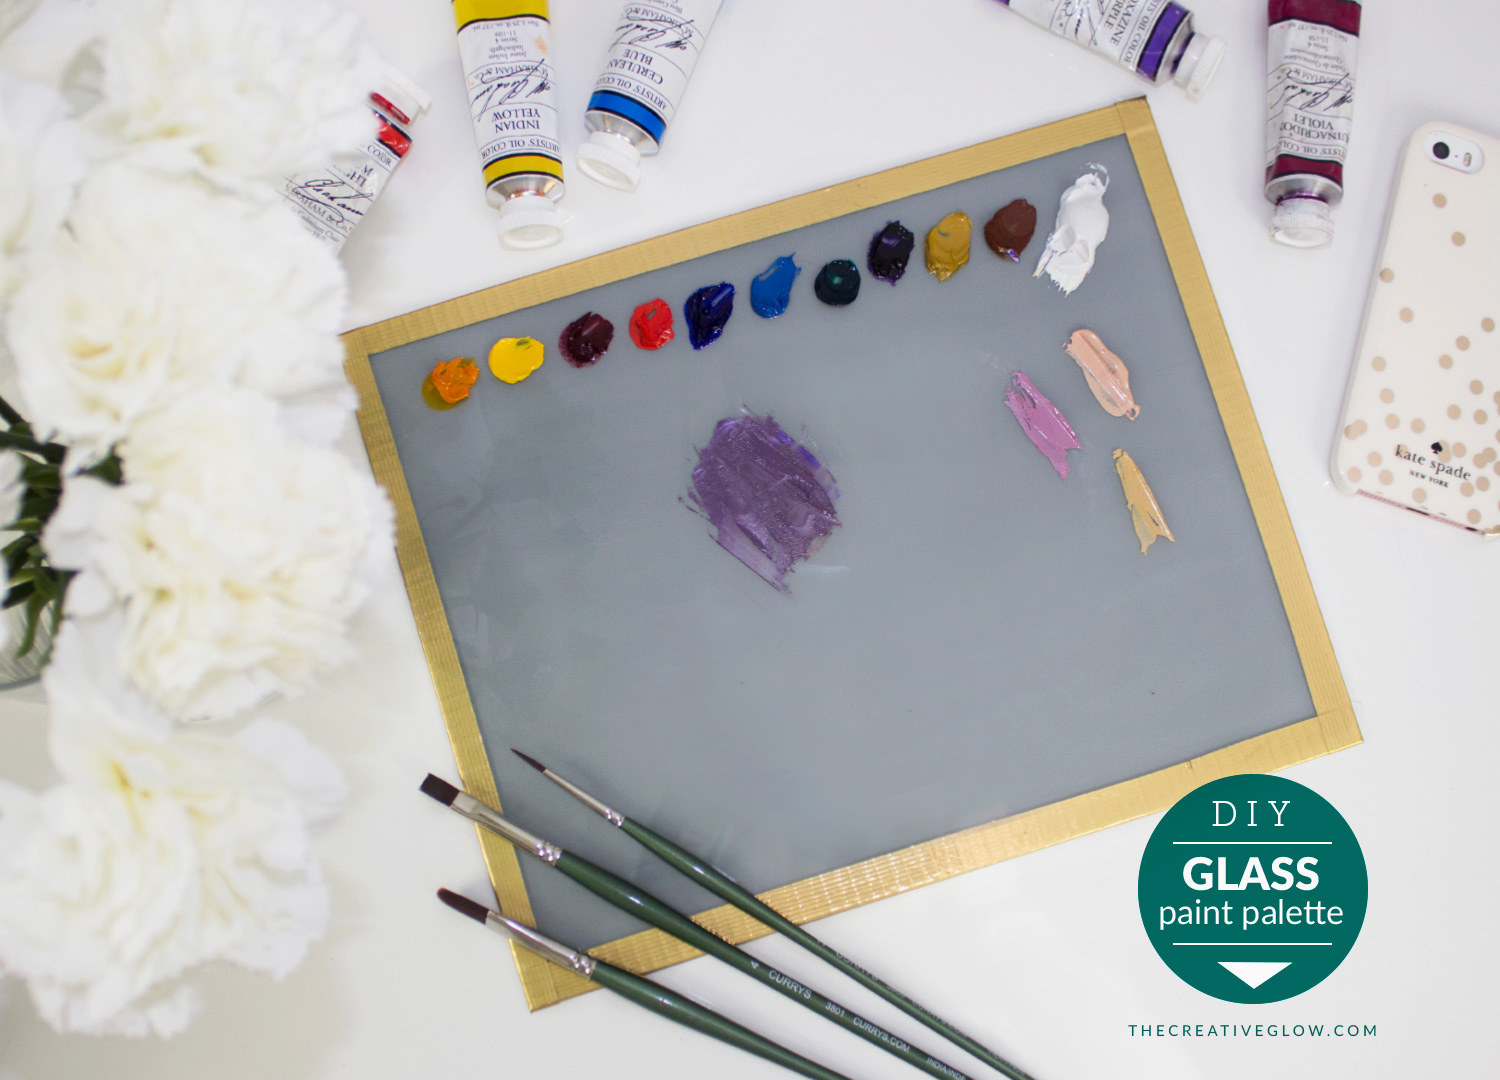 DIY Glass Paint Palette - Cheap & Easy as Heck!  The Creative Glow: DIY Glass  Paint Palette - Cheap & Easy as Heck!